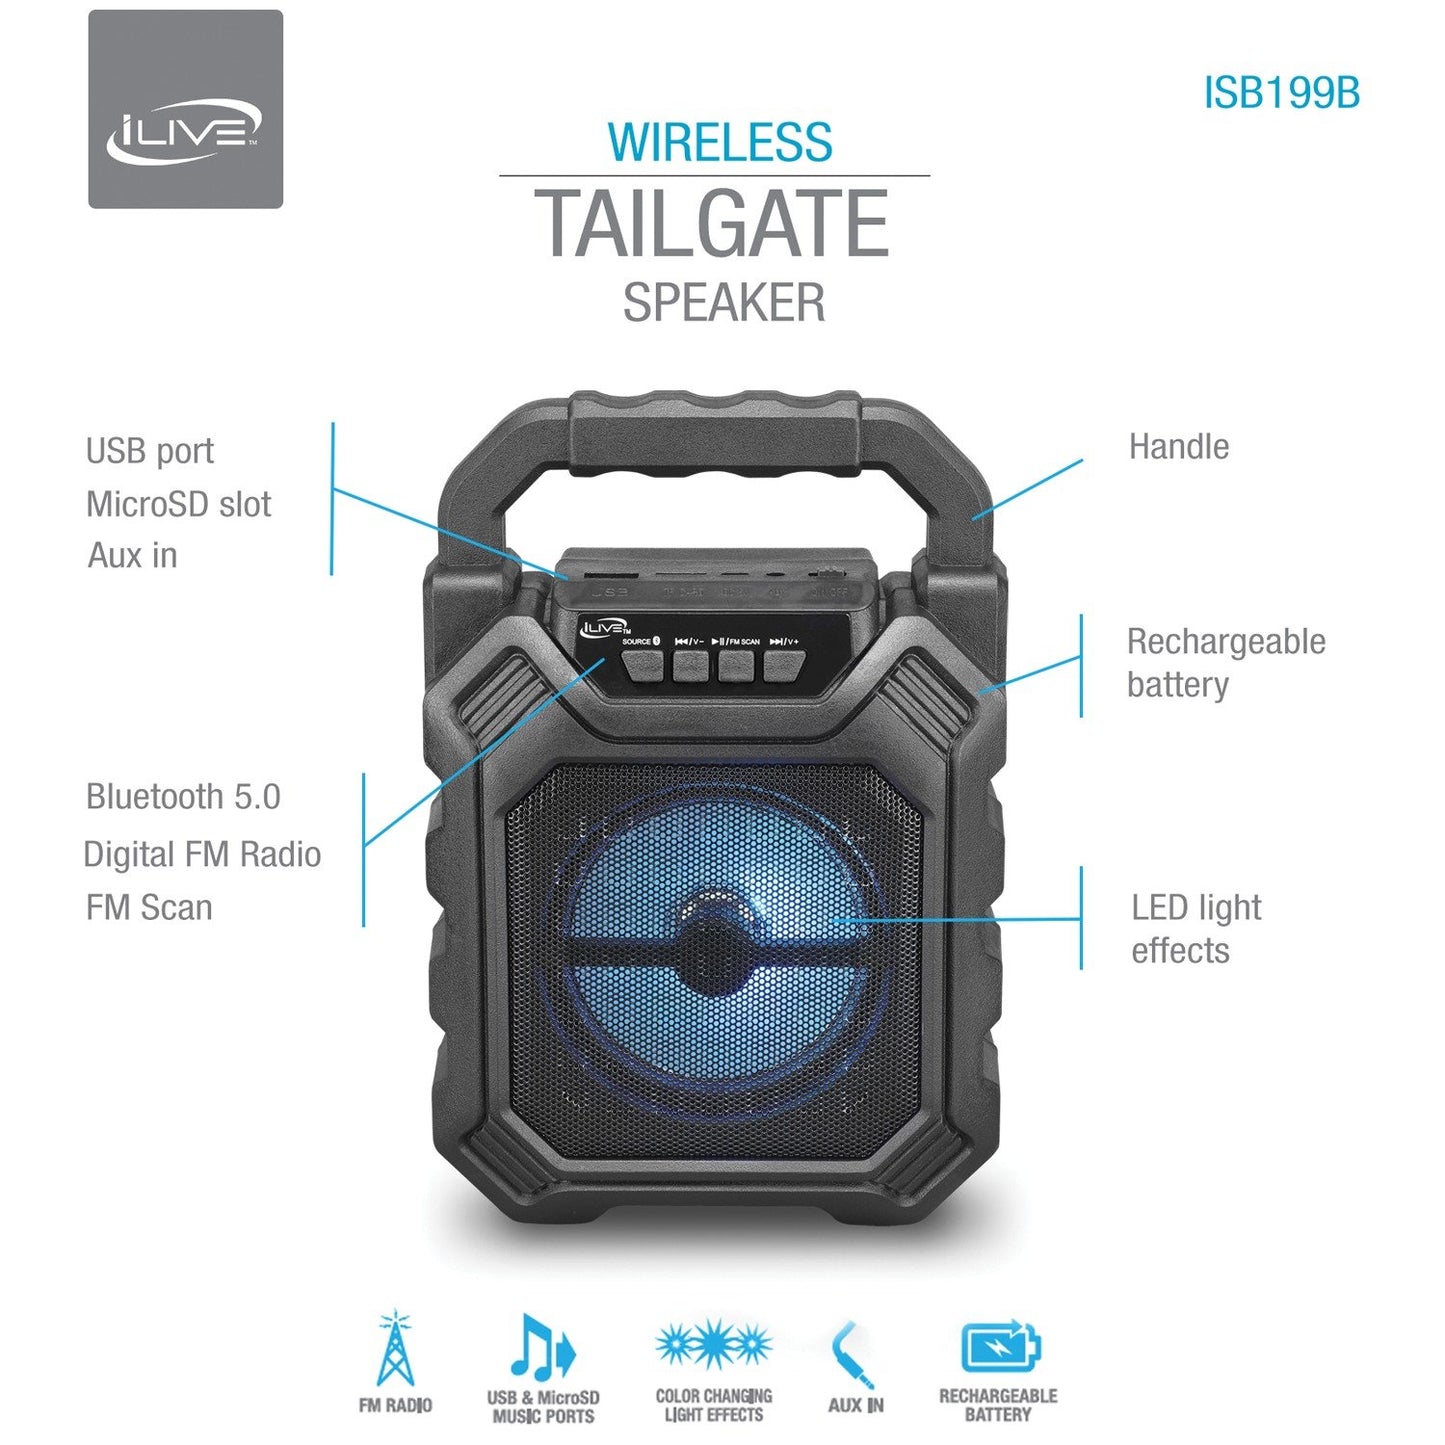 ILIVE ISB199B Miniature Bluetooth Tailgate Portable Party System